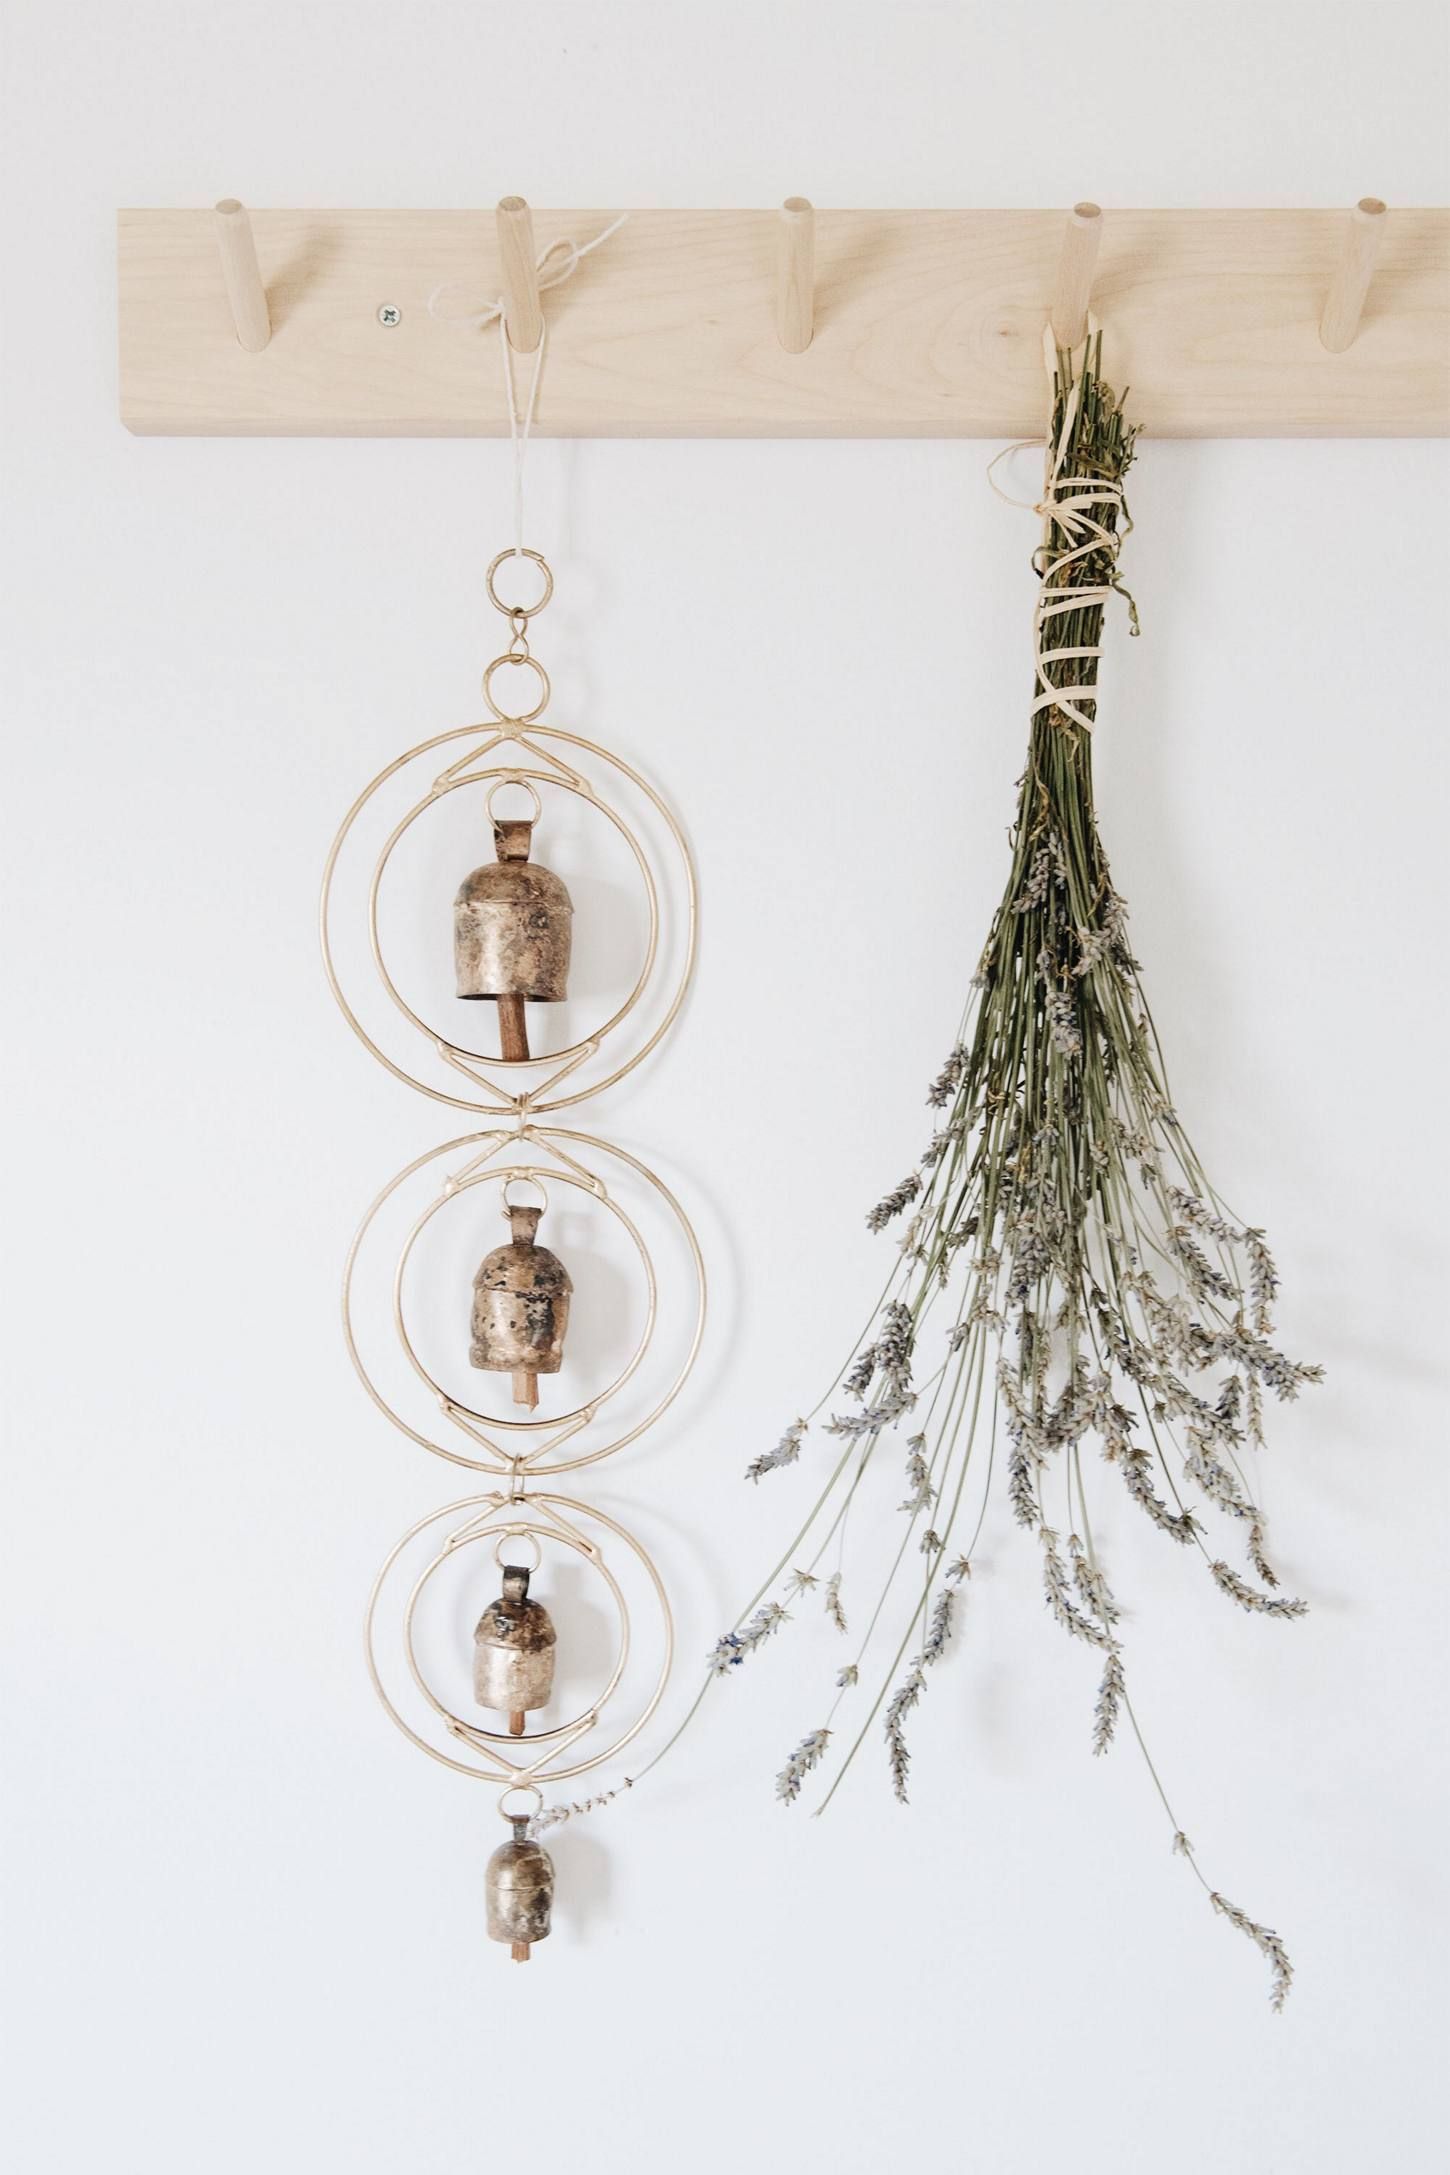 Connected Goods Handmade Copper Chime | Anthropologie (US)